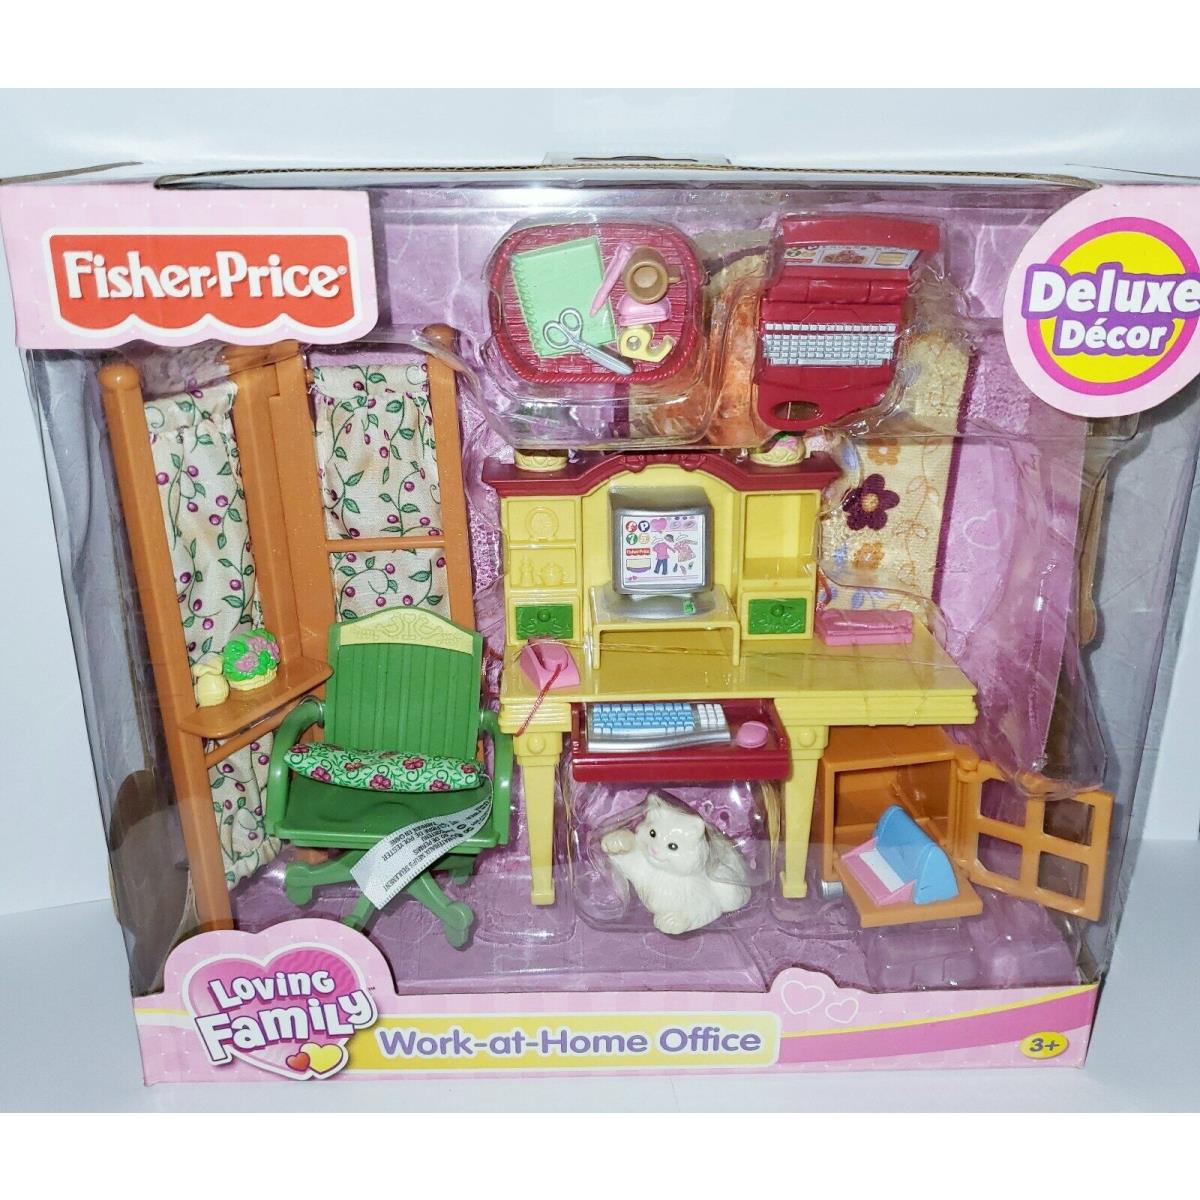 Loving Family Twin Time Grand Doll House Play Set Work at Home Office Cat